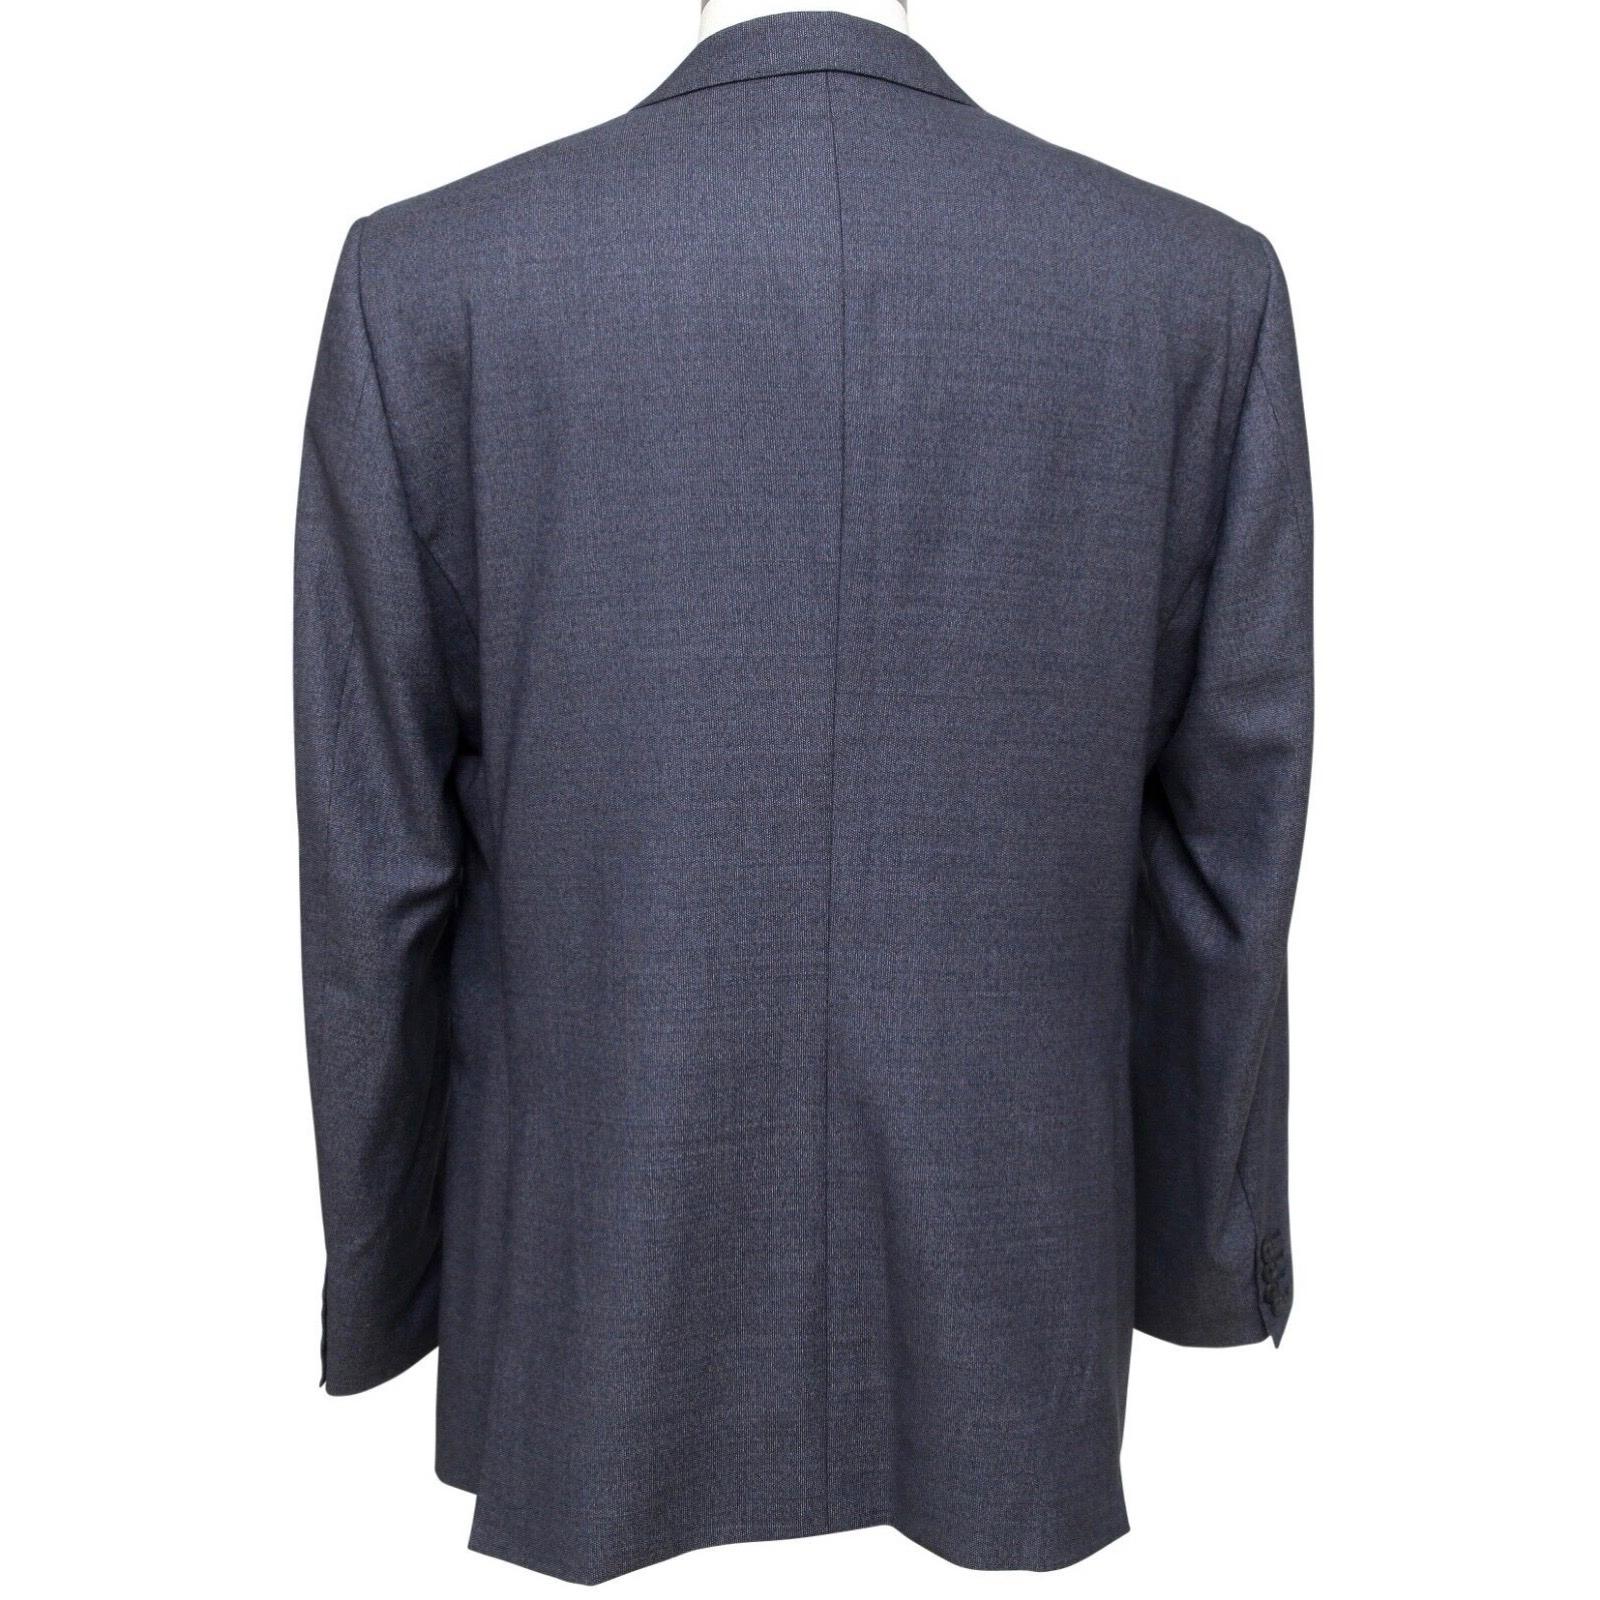 BURBERRY LONDON Men's Wool Blazer Jacket Blue Sz 54R In Excellent Condition For Sale In Hollywood, FL